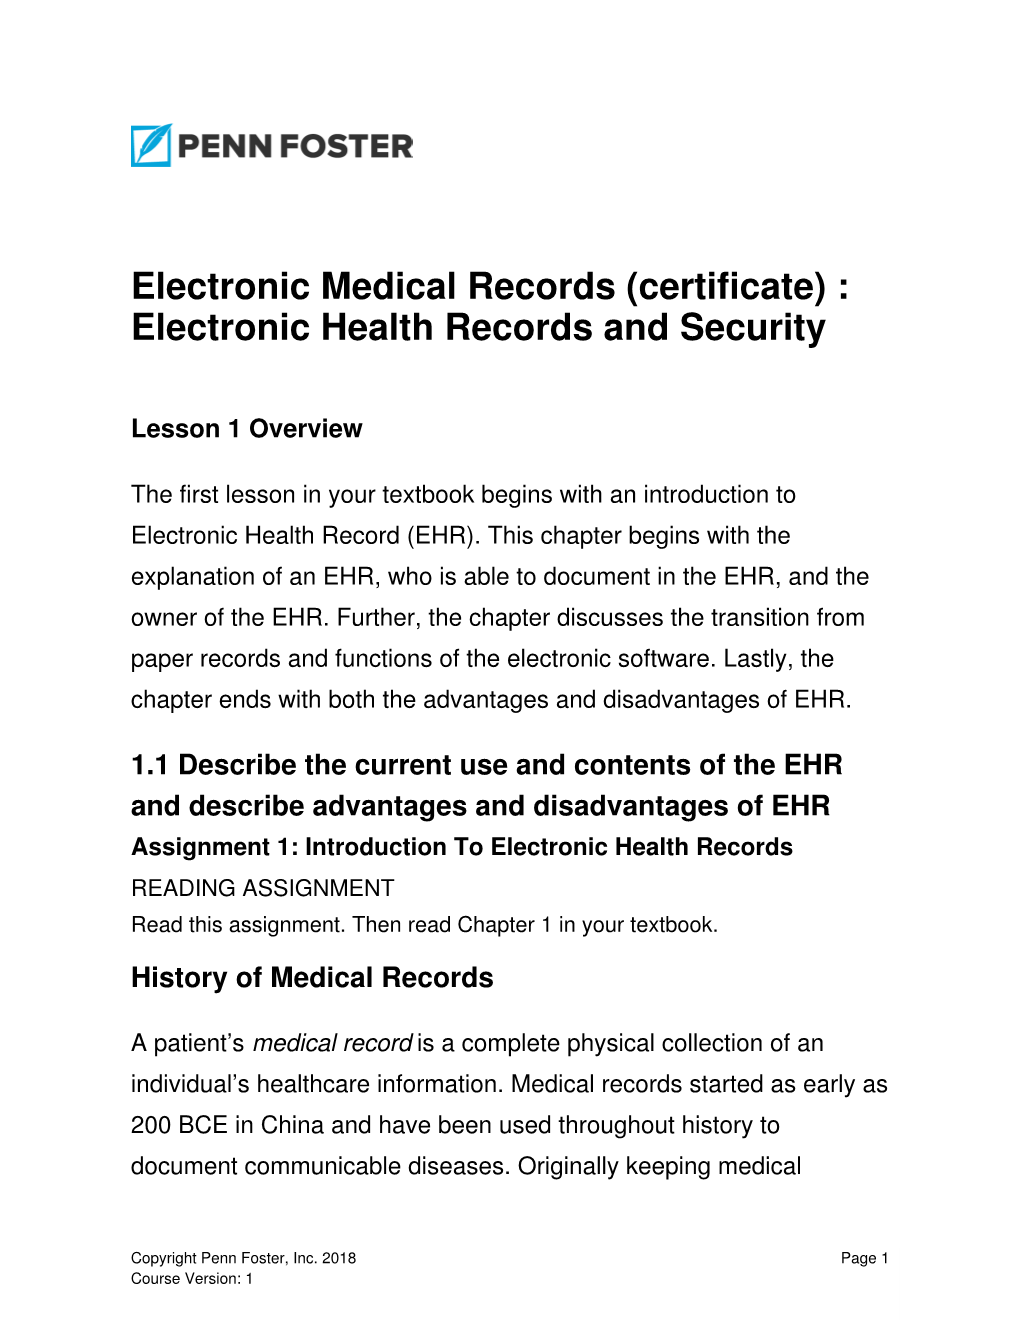 Electronic Medical Records (Certificate) : Electronic Health Records and Security